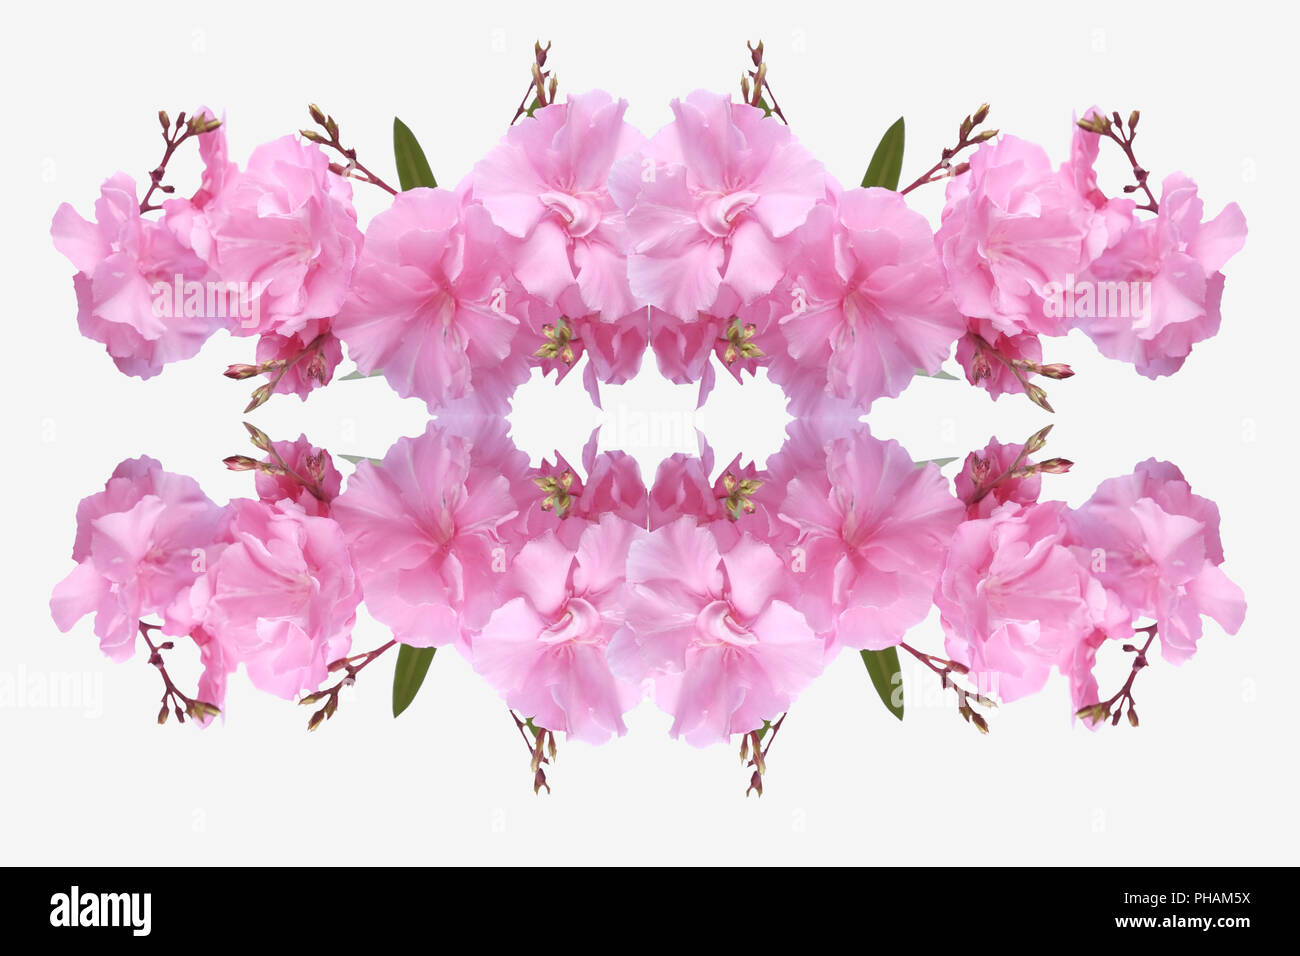 Arrangement with oleander blossoms Stock Photo